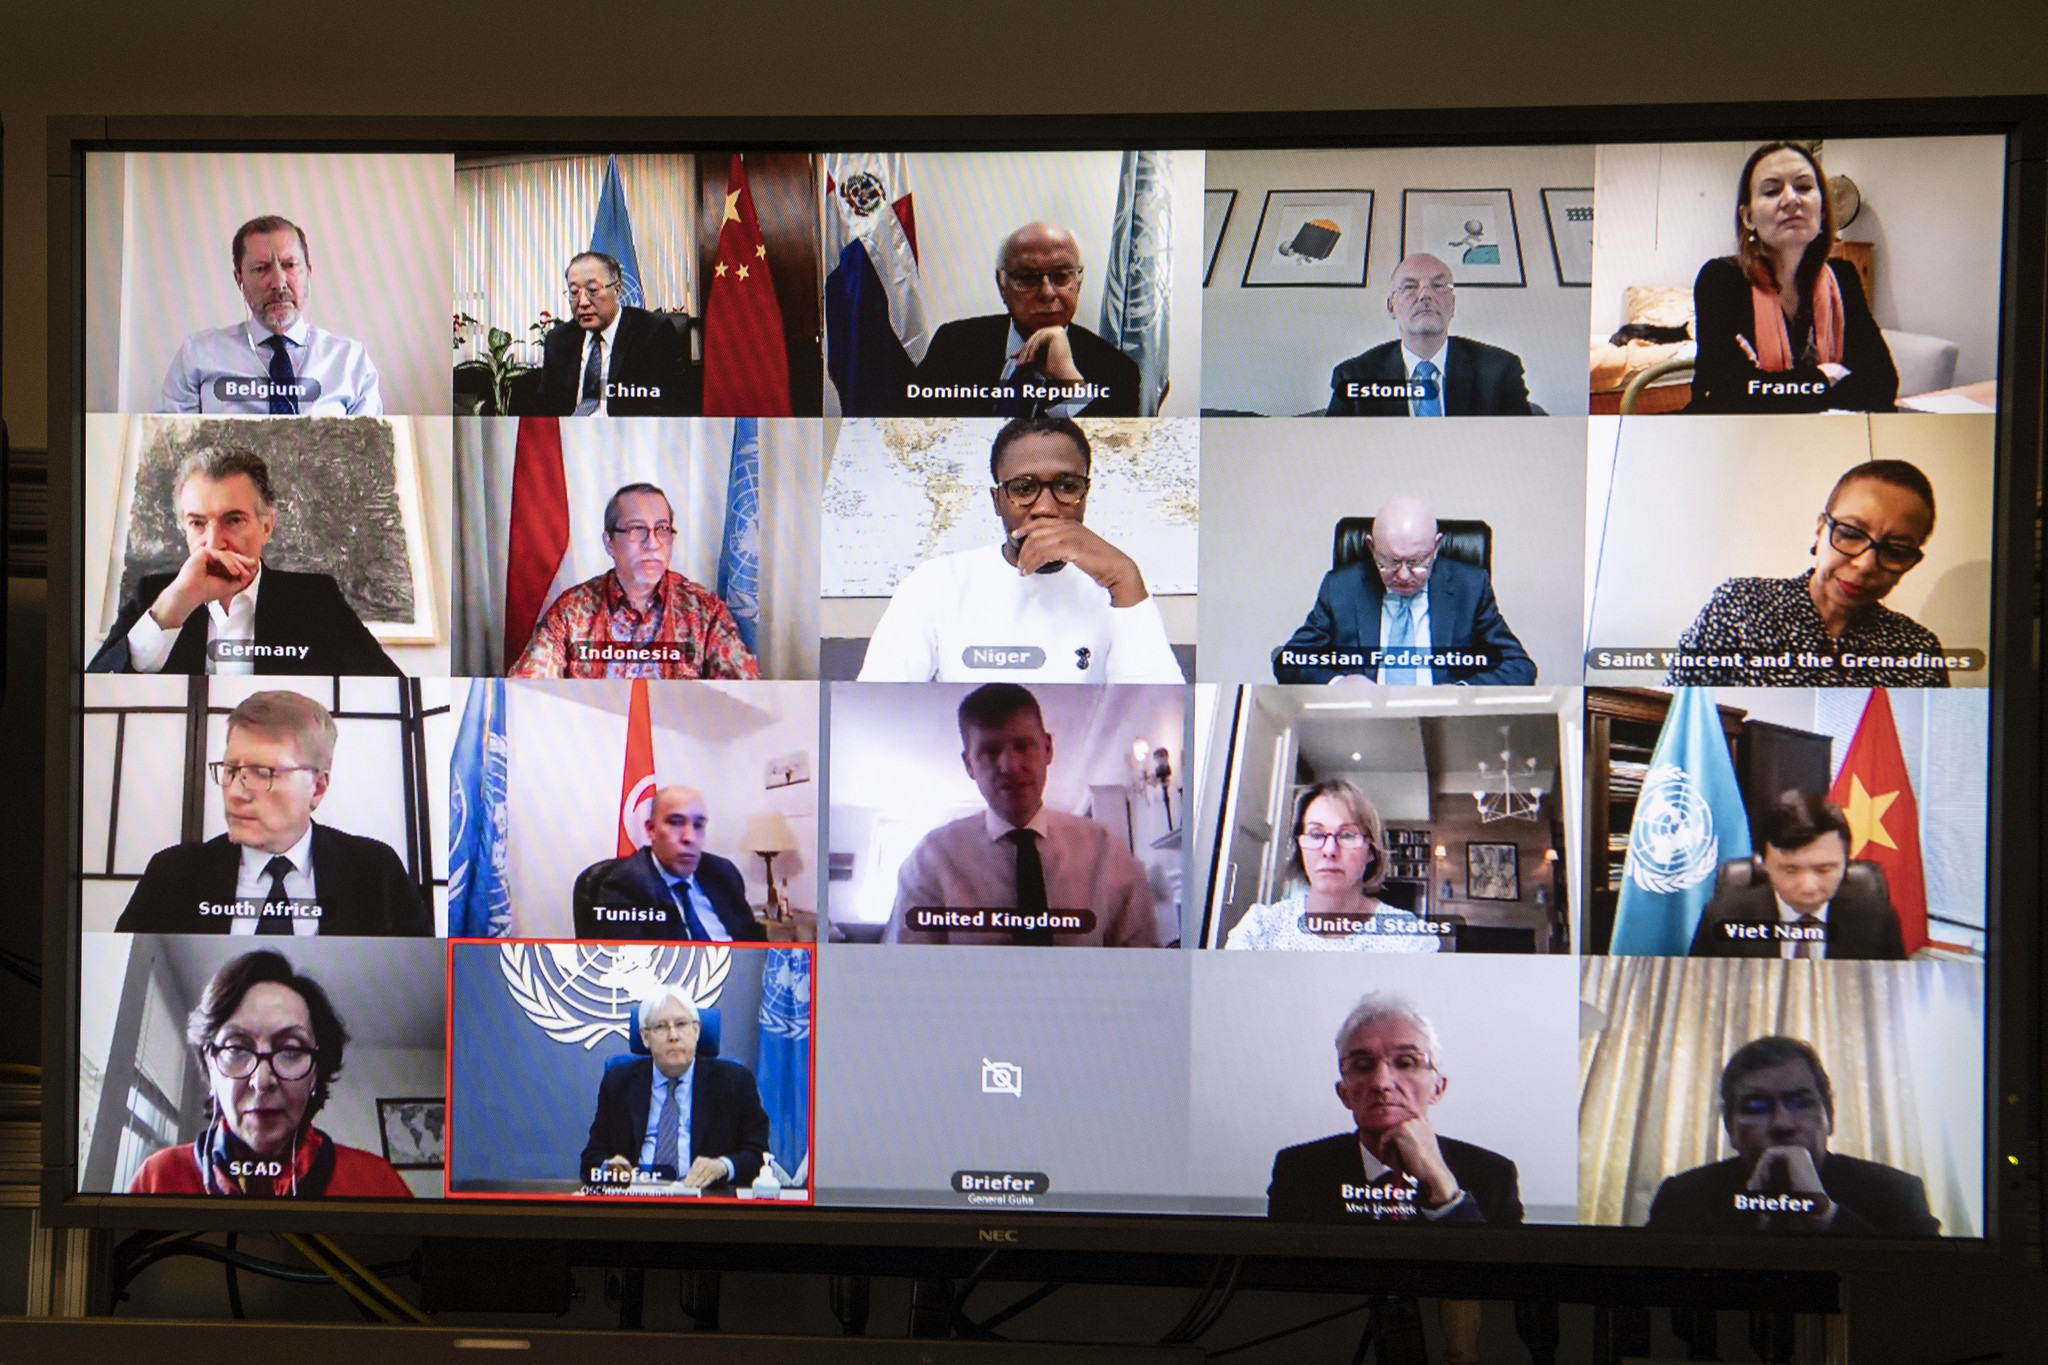 A snapshot of a computer screen showing a video conference among many participants.